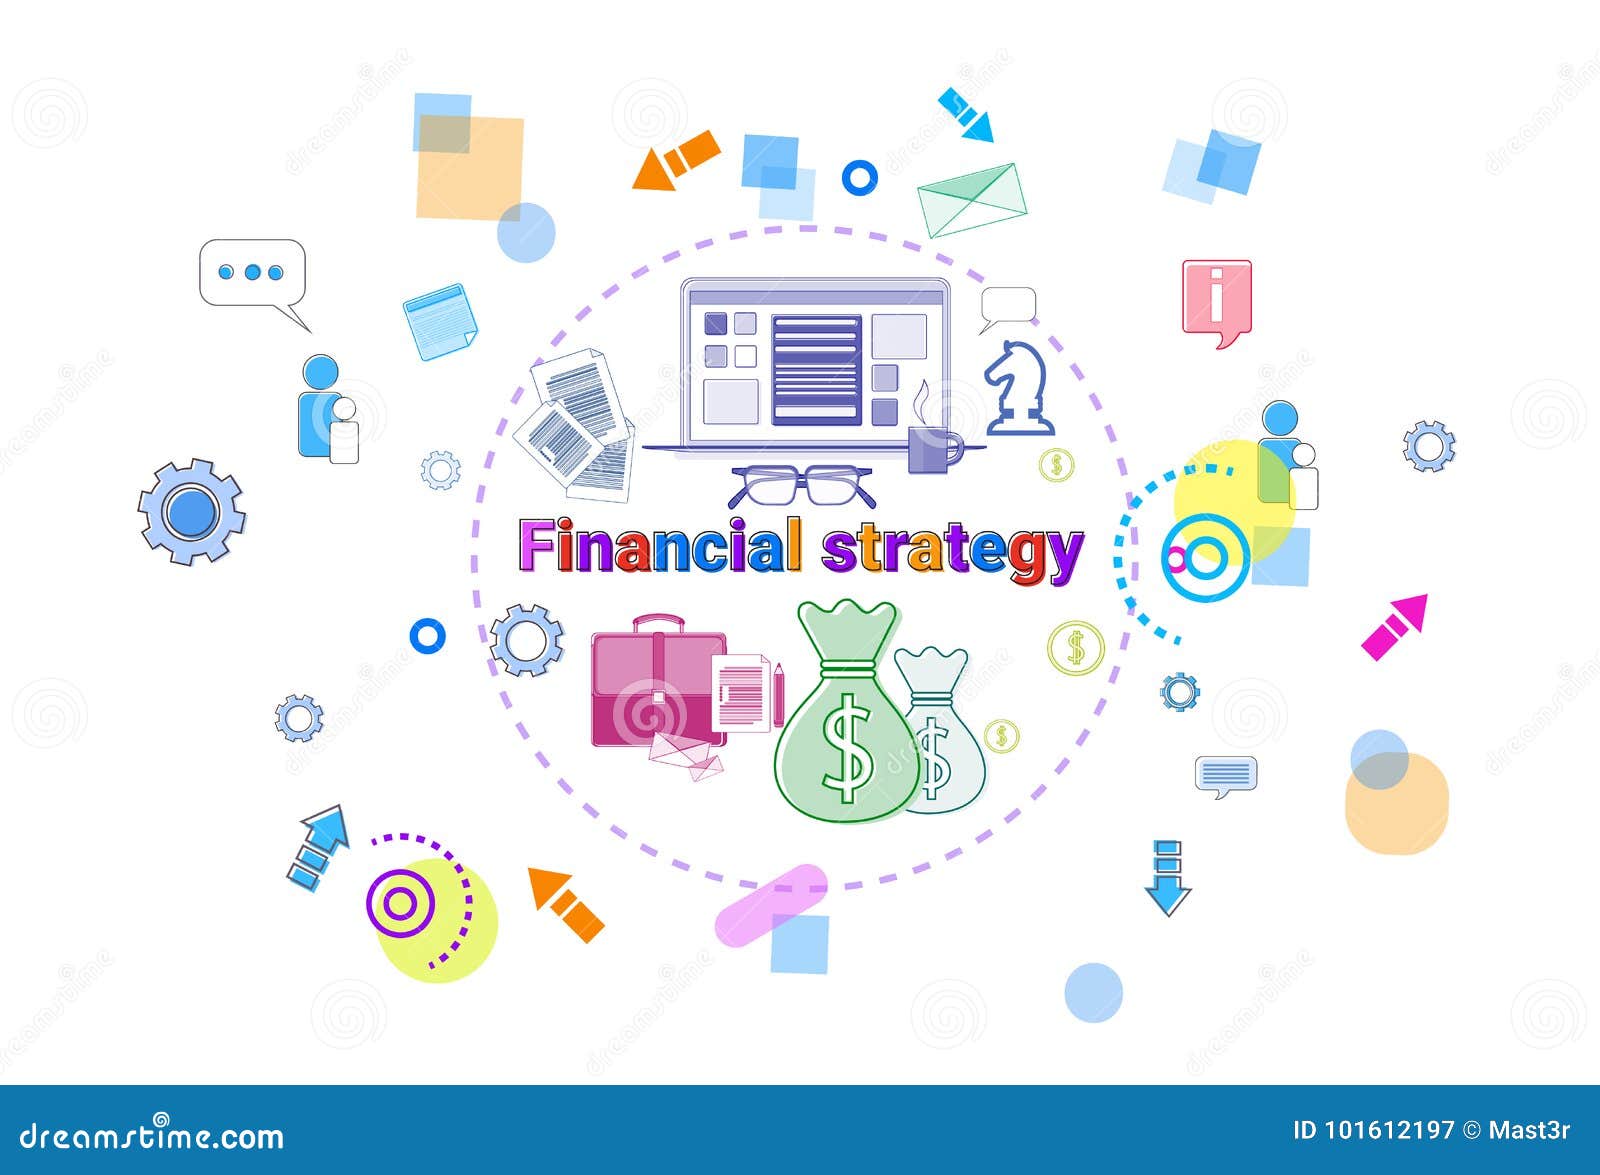 financial-strategy-concept-business-plan-development-finance-project-banner-financial-strategy-concept-business-plan-development-101612197.jpg